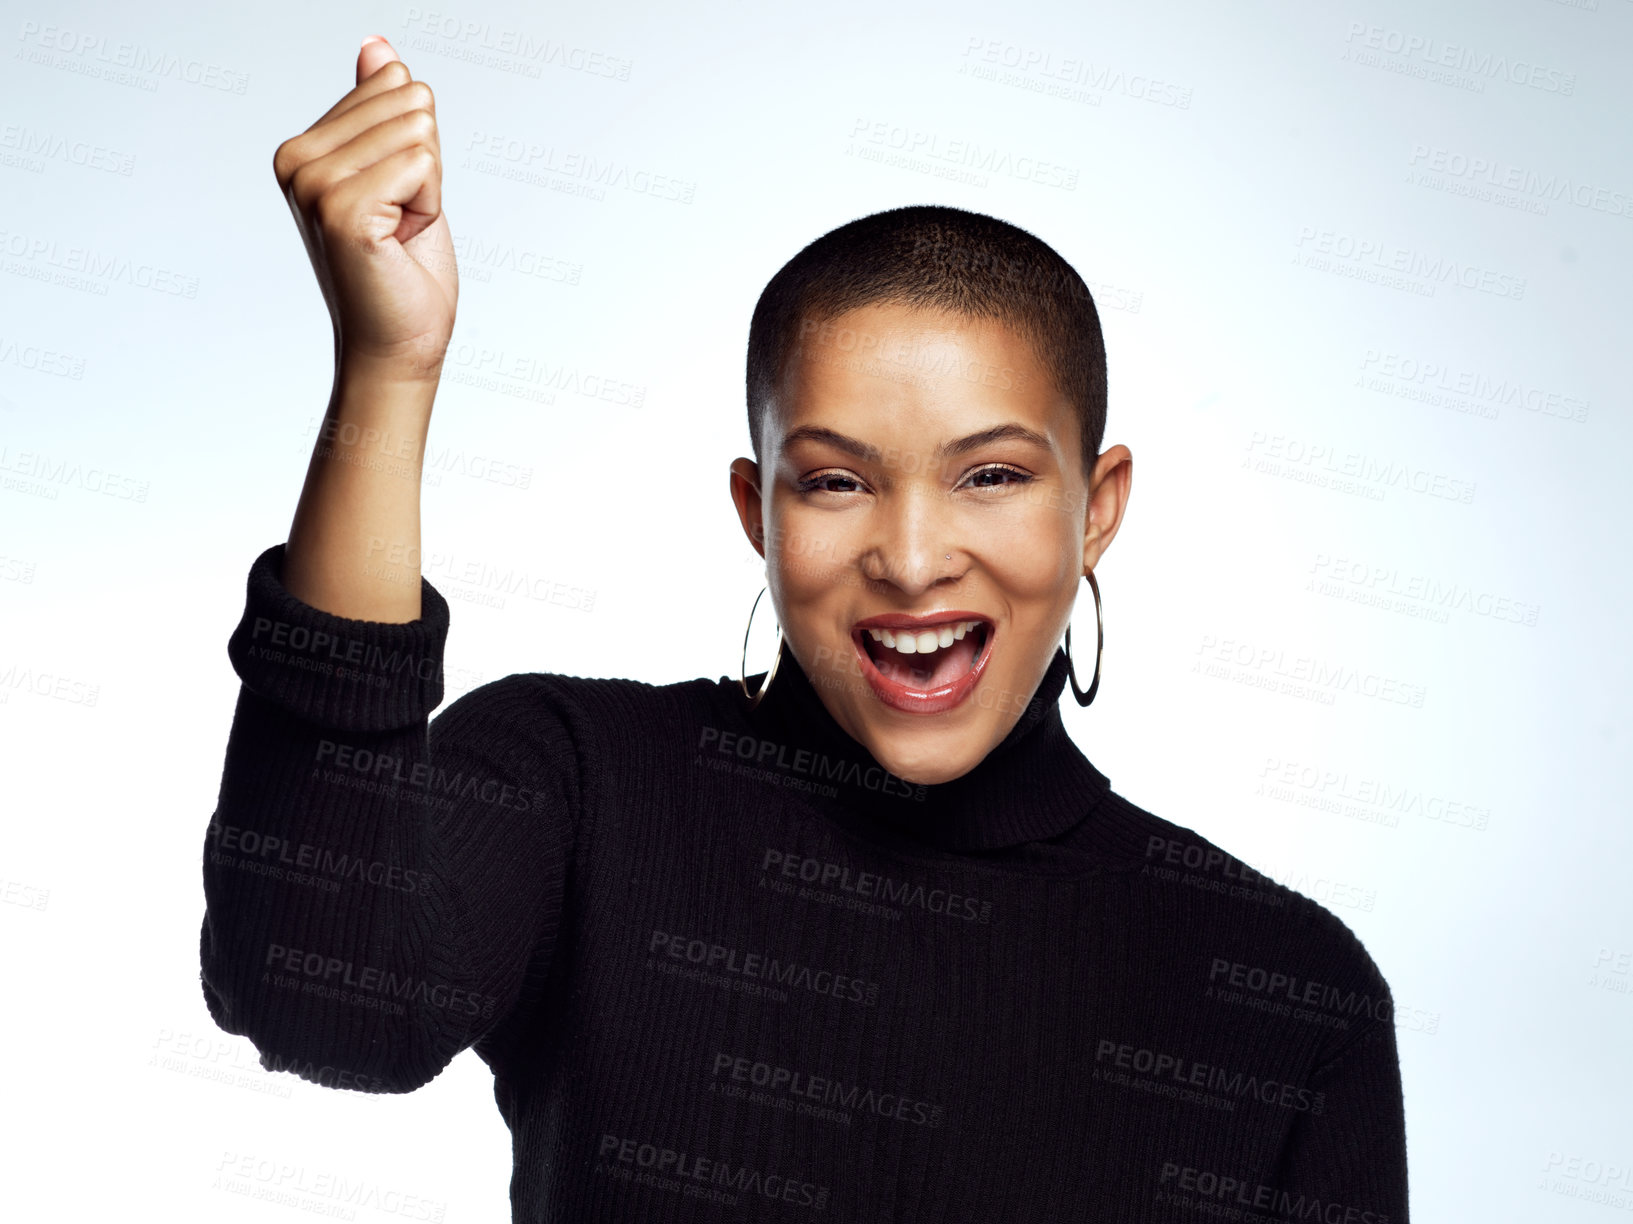 Buy stock photo Studio shot of an attractive young woman posing with her arm raised and fist clinched against a grey background